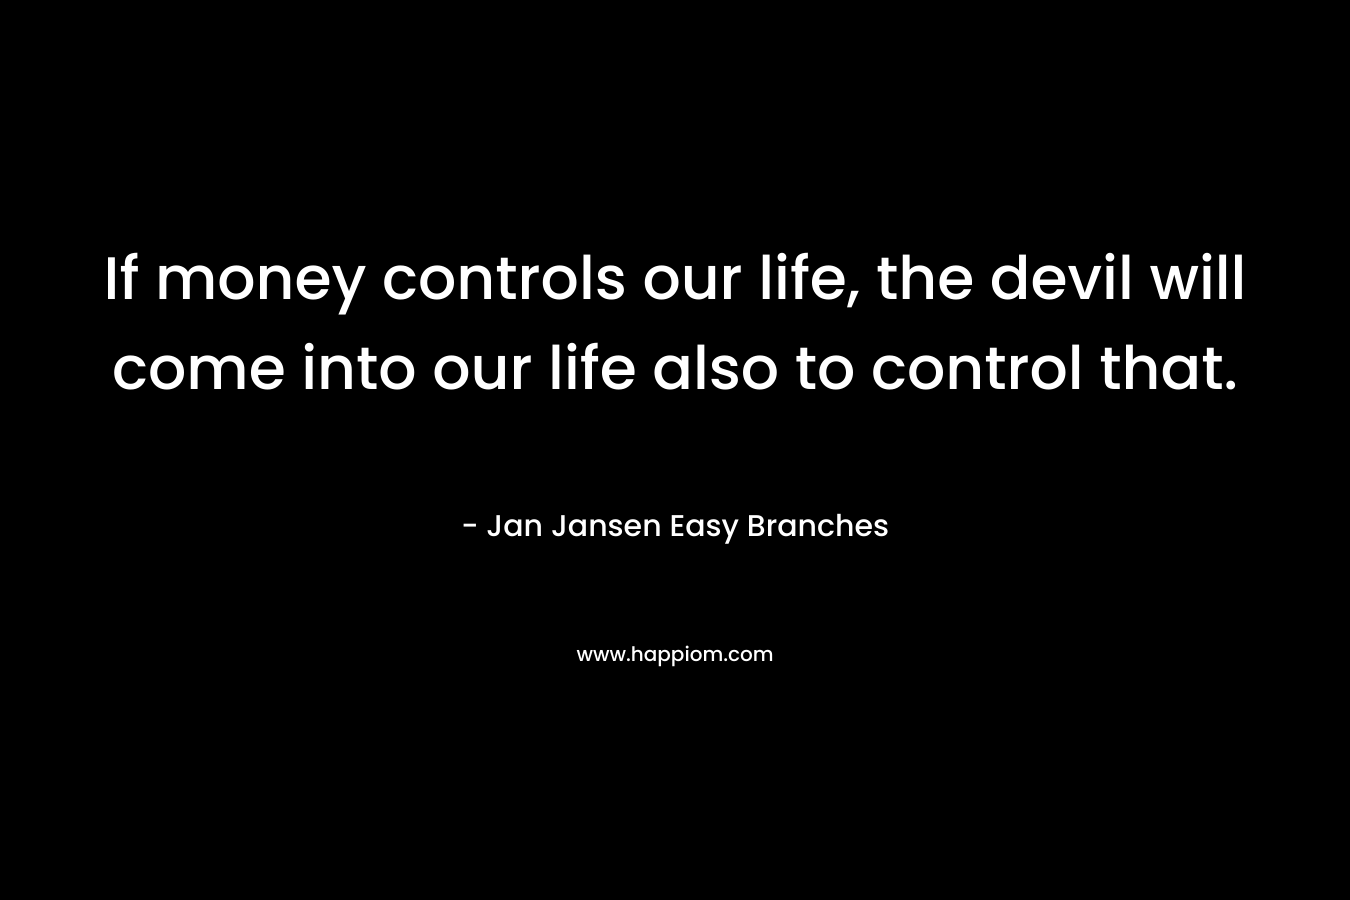 If money controls our life, the devil will come into our life also to control that.